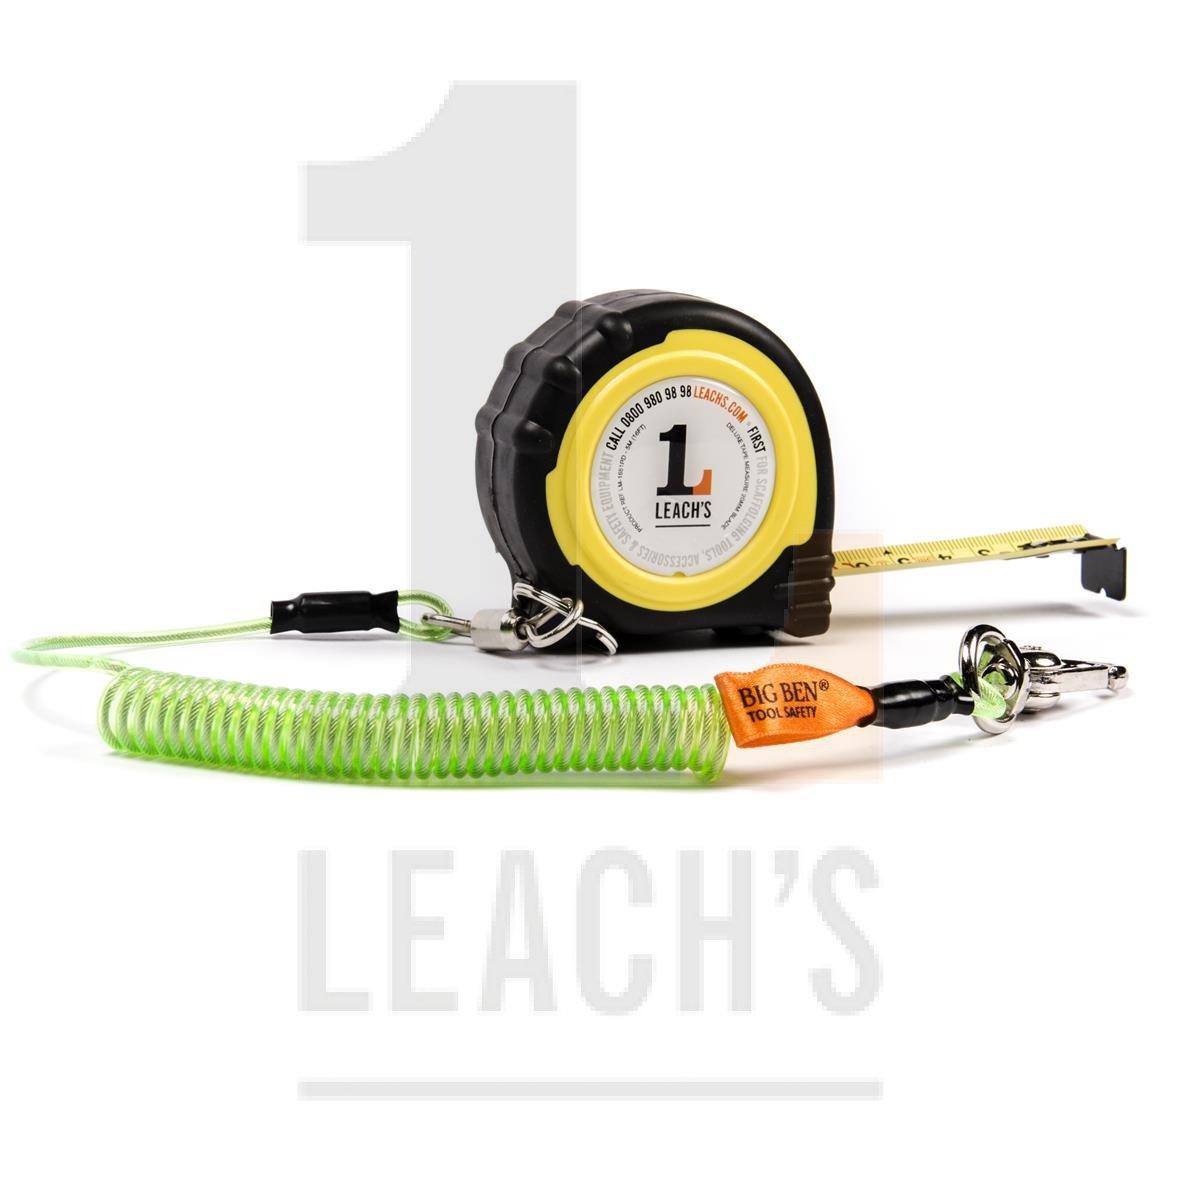 5m Tape Measure Rubber Enclosed 20mm Blade c/w Green Deluxe Tool Safety Rope / 5 м Рулетка закрытая из каучака - фото 2 - id-p105318606